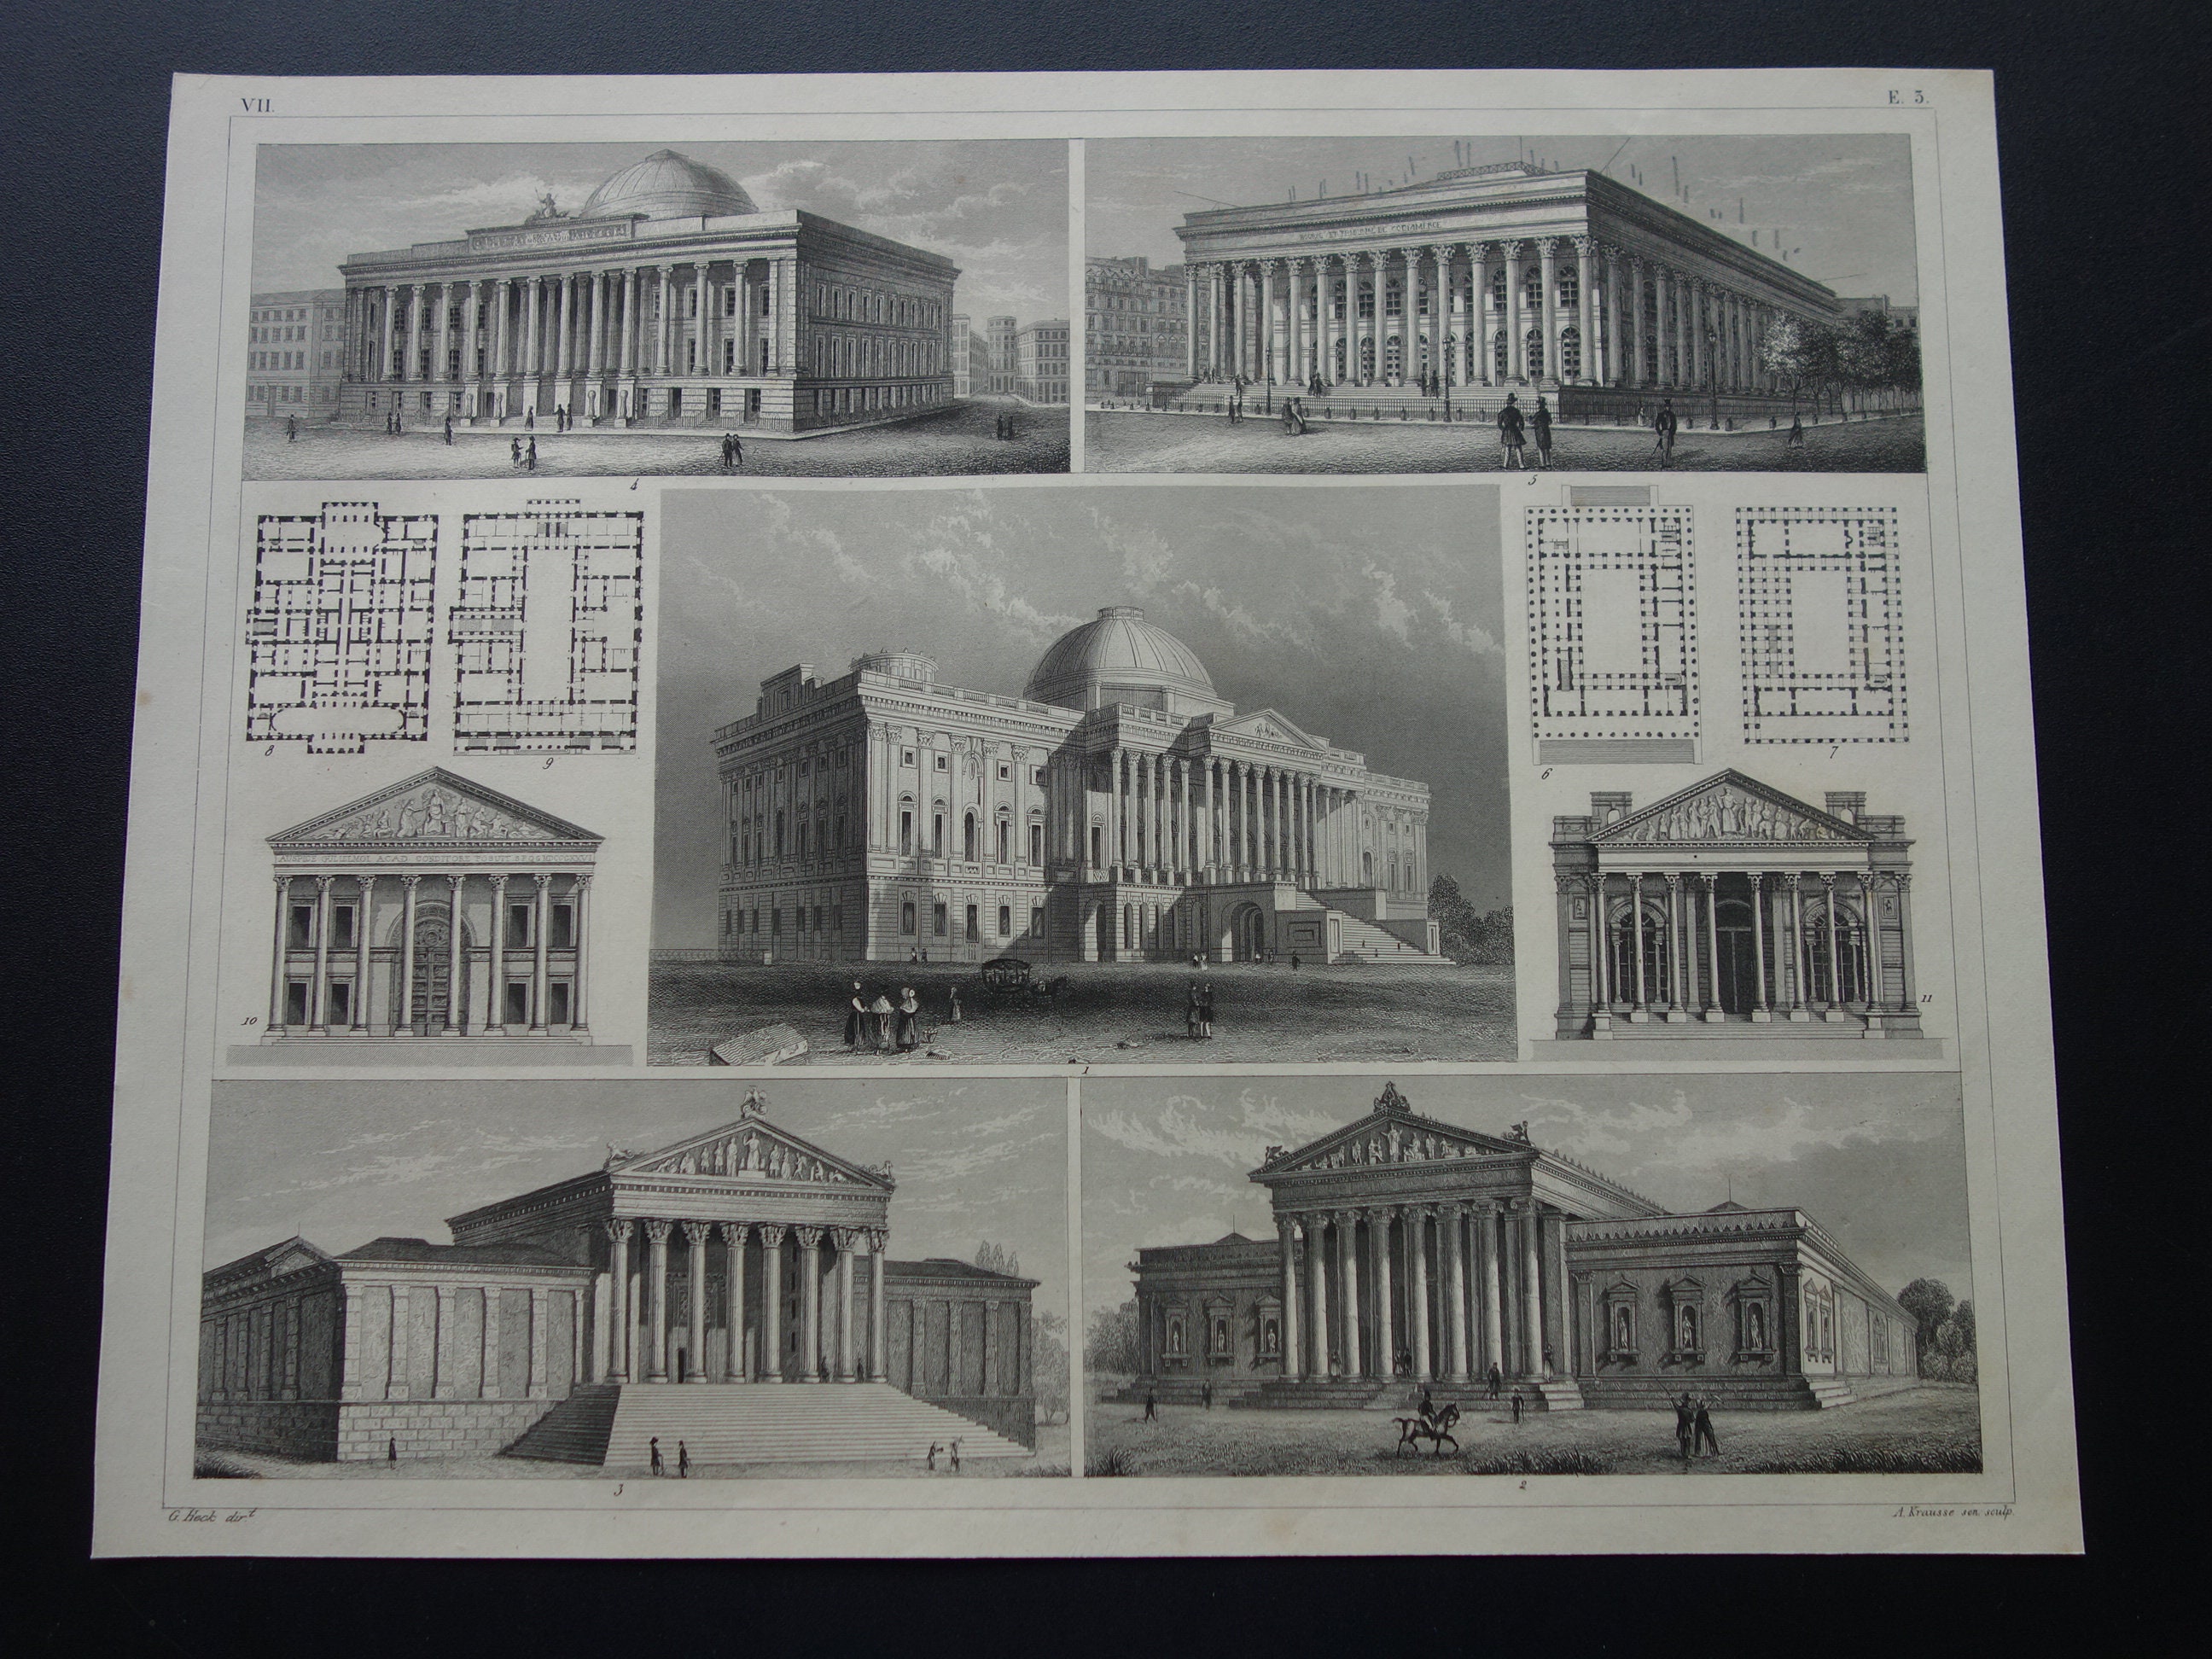 Neoclassical Architecture Drawings for Sale (Page #2 of 2) - Fine Art  America